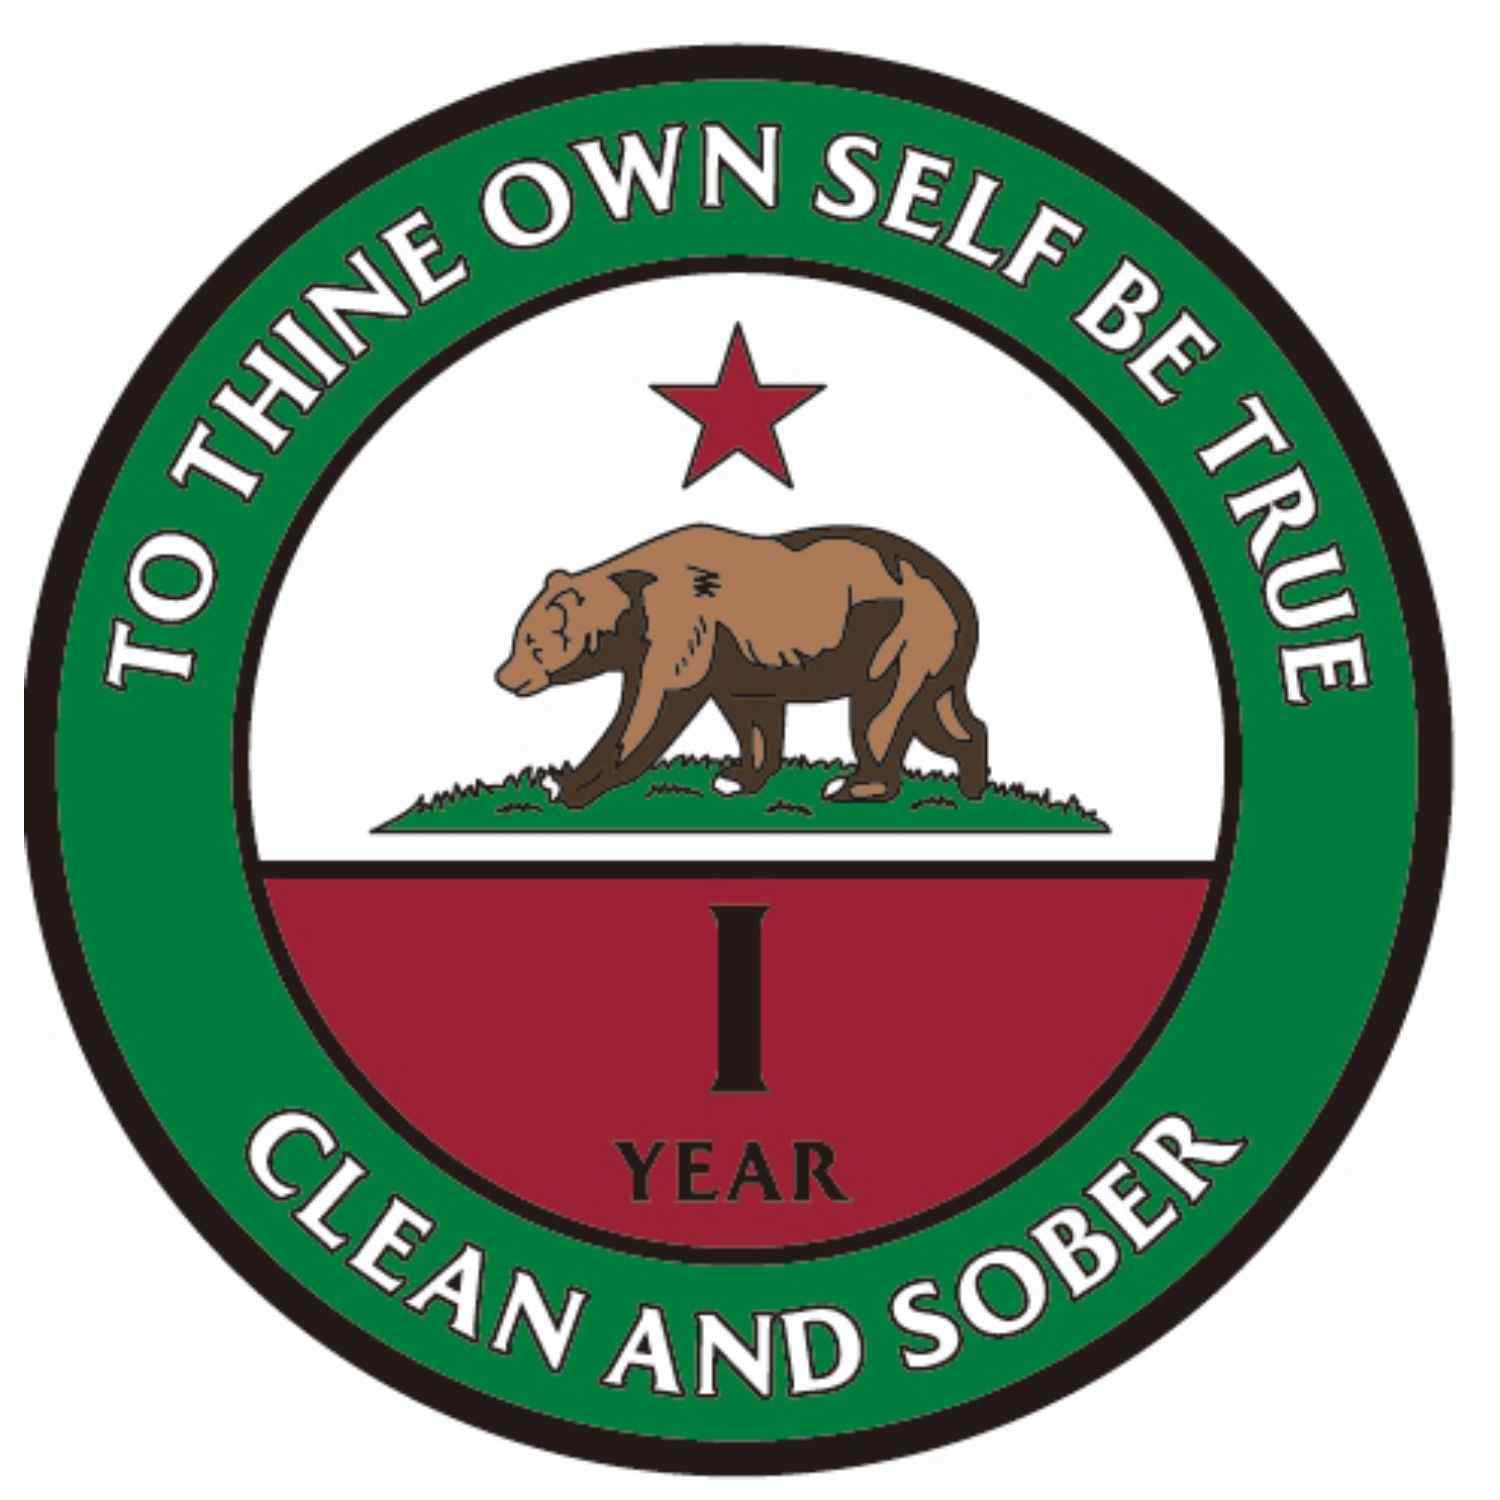 California AA Coin 1-50yrs Sobriety Chip